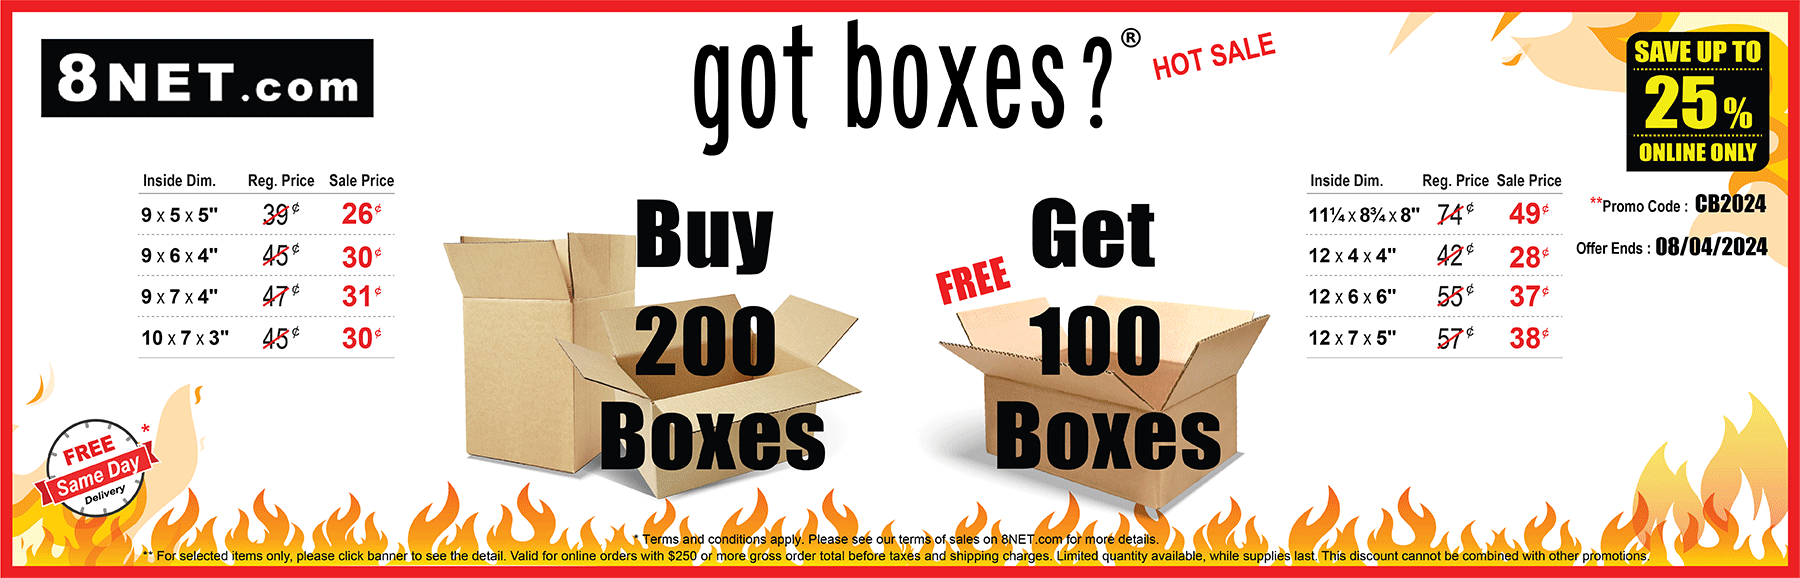 https://www.8net.com/shipping-corrugated-boxes-bins-wraps-pads/buy-5-get-2-free-boxes.html